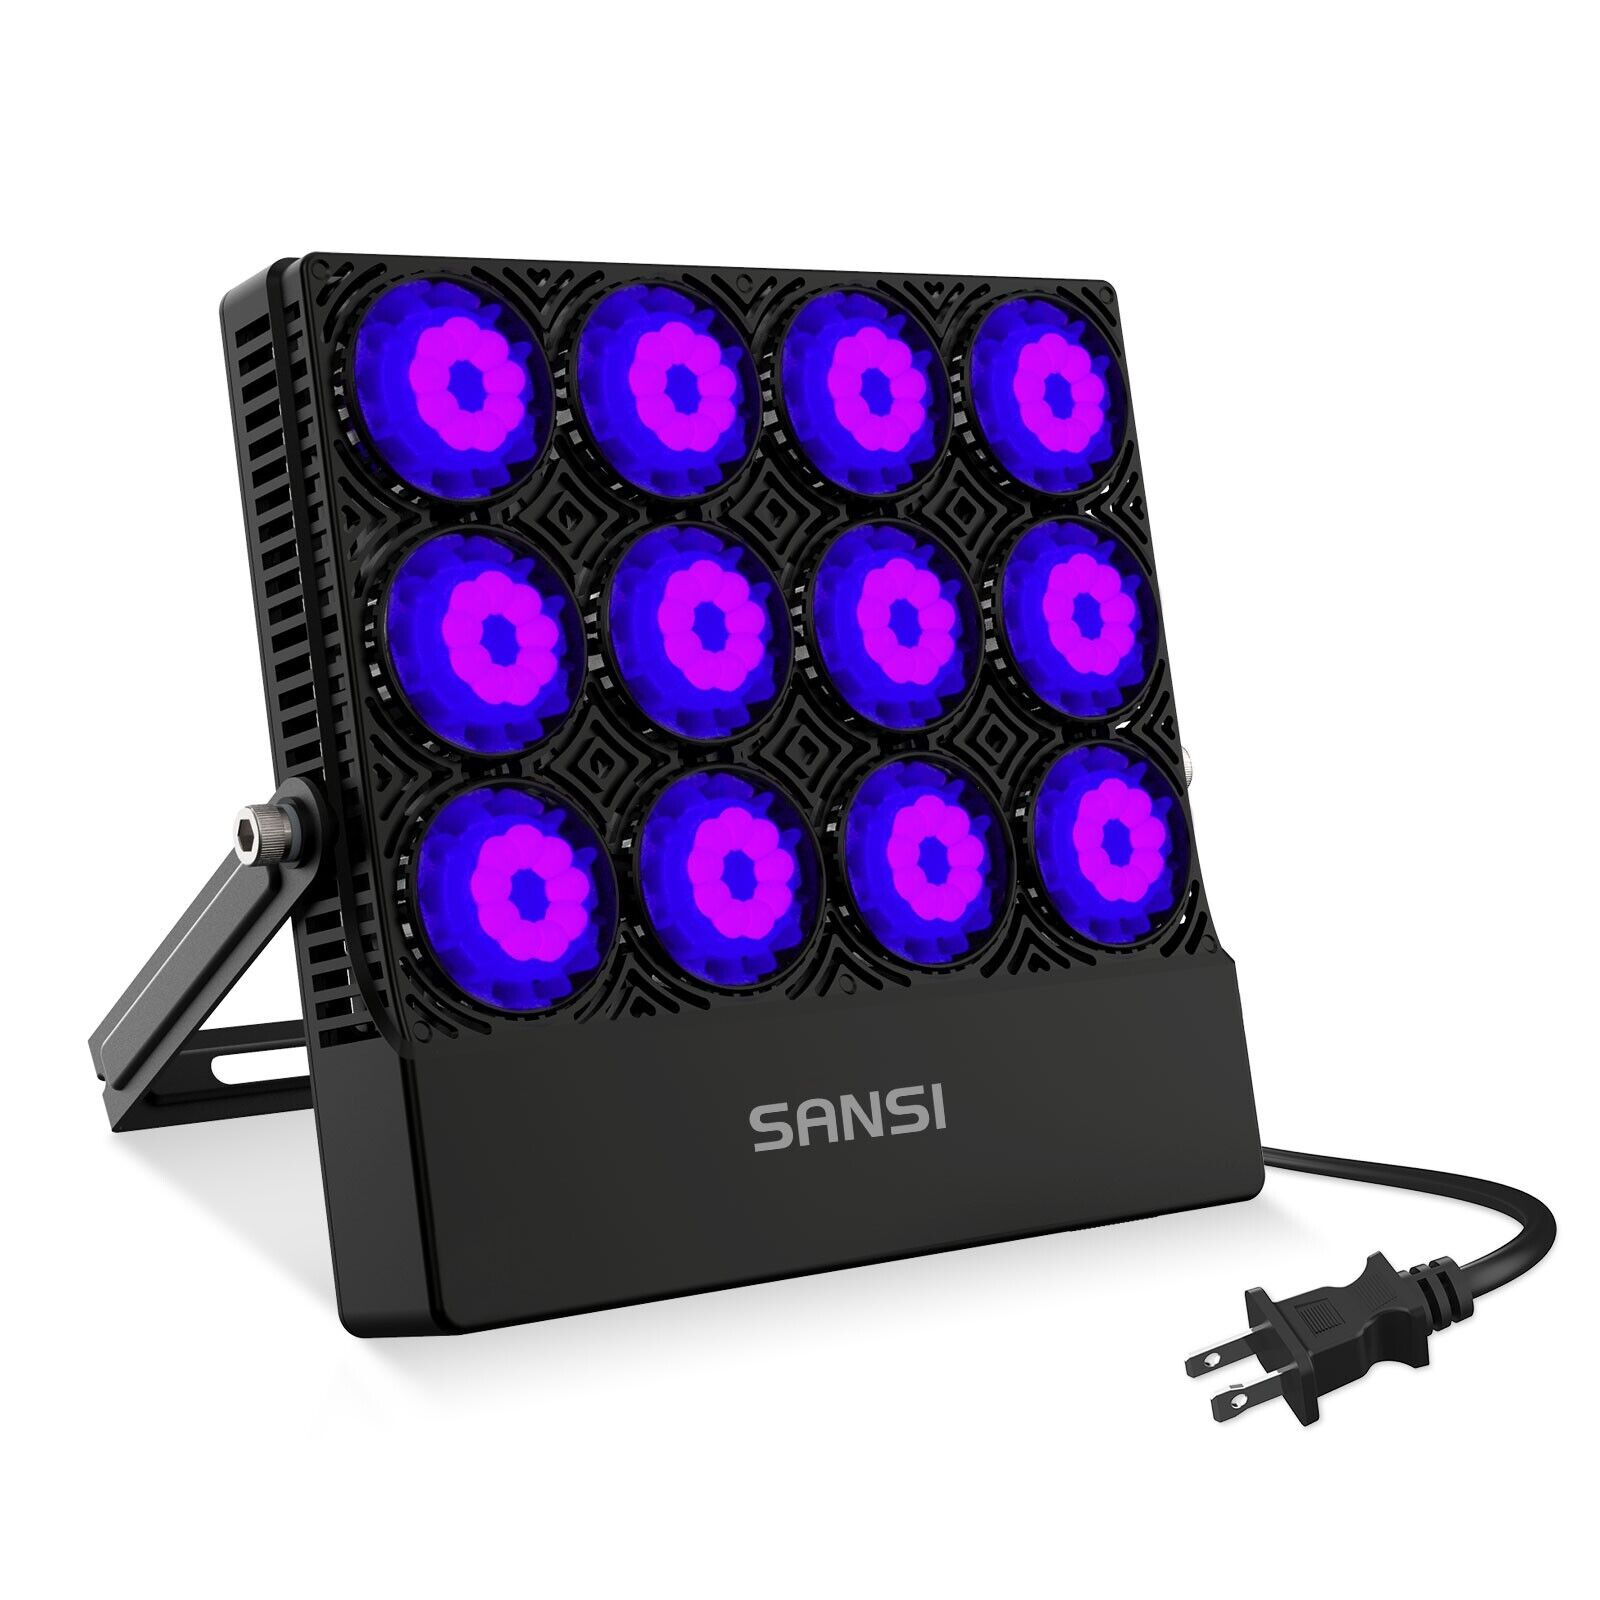 SANSI 70W LED UV Black Light Flood Light Glow In The Dark UV Party Stage Light . Available Now for $55.07